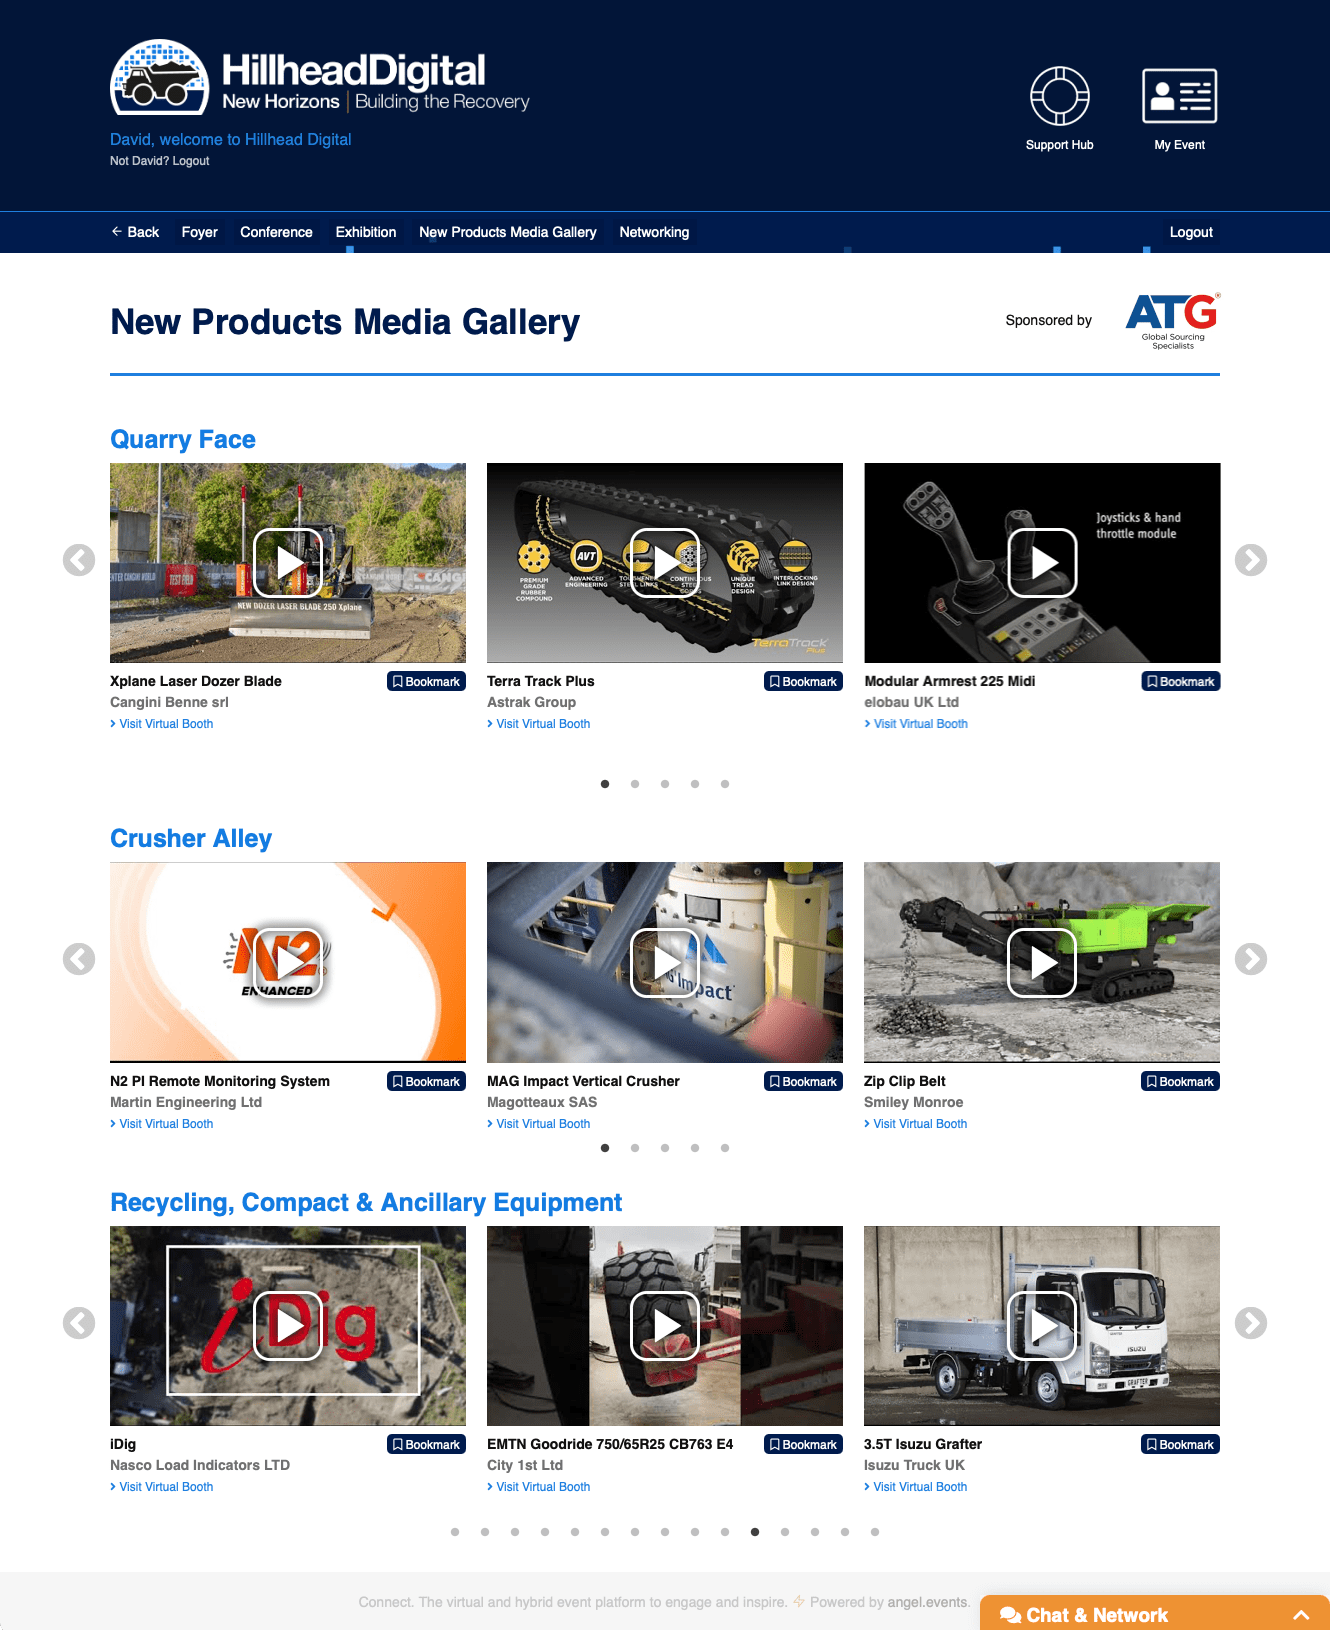 Explore the New Products Media Gallery